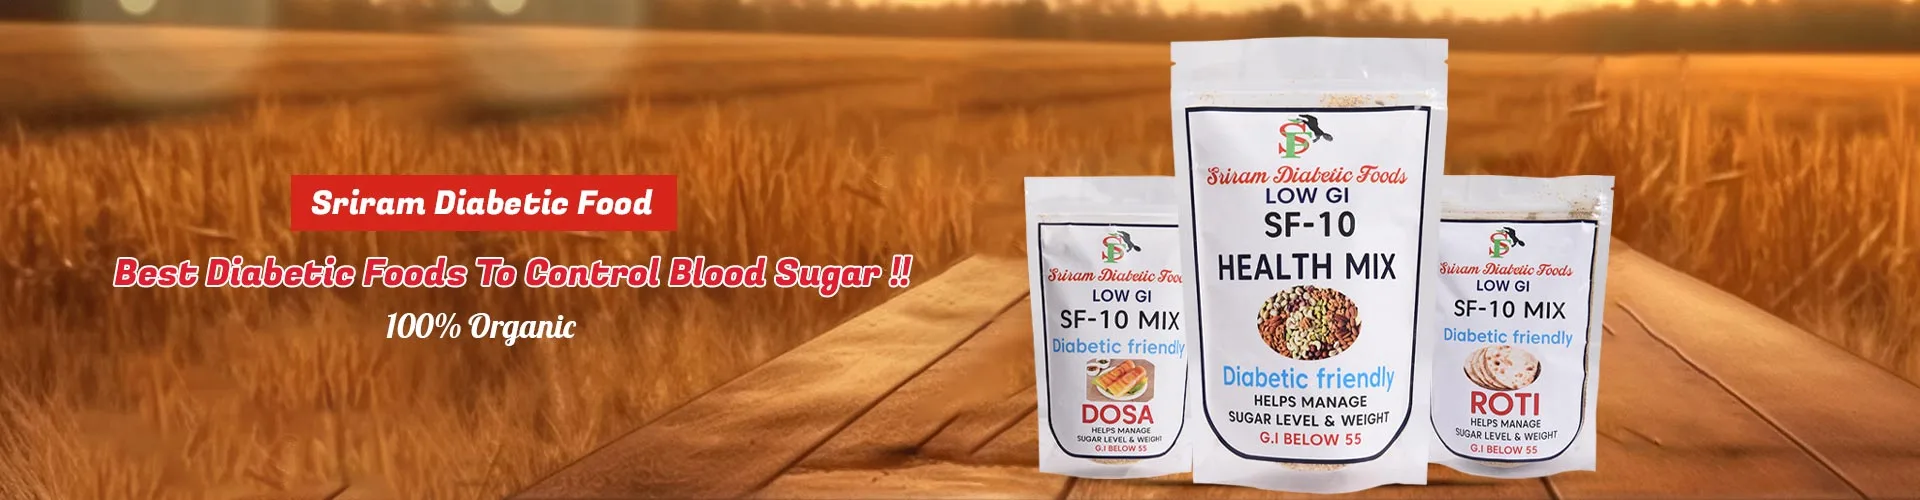 Dosa Mix Manufacturers in Central Coast